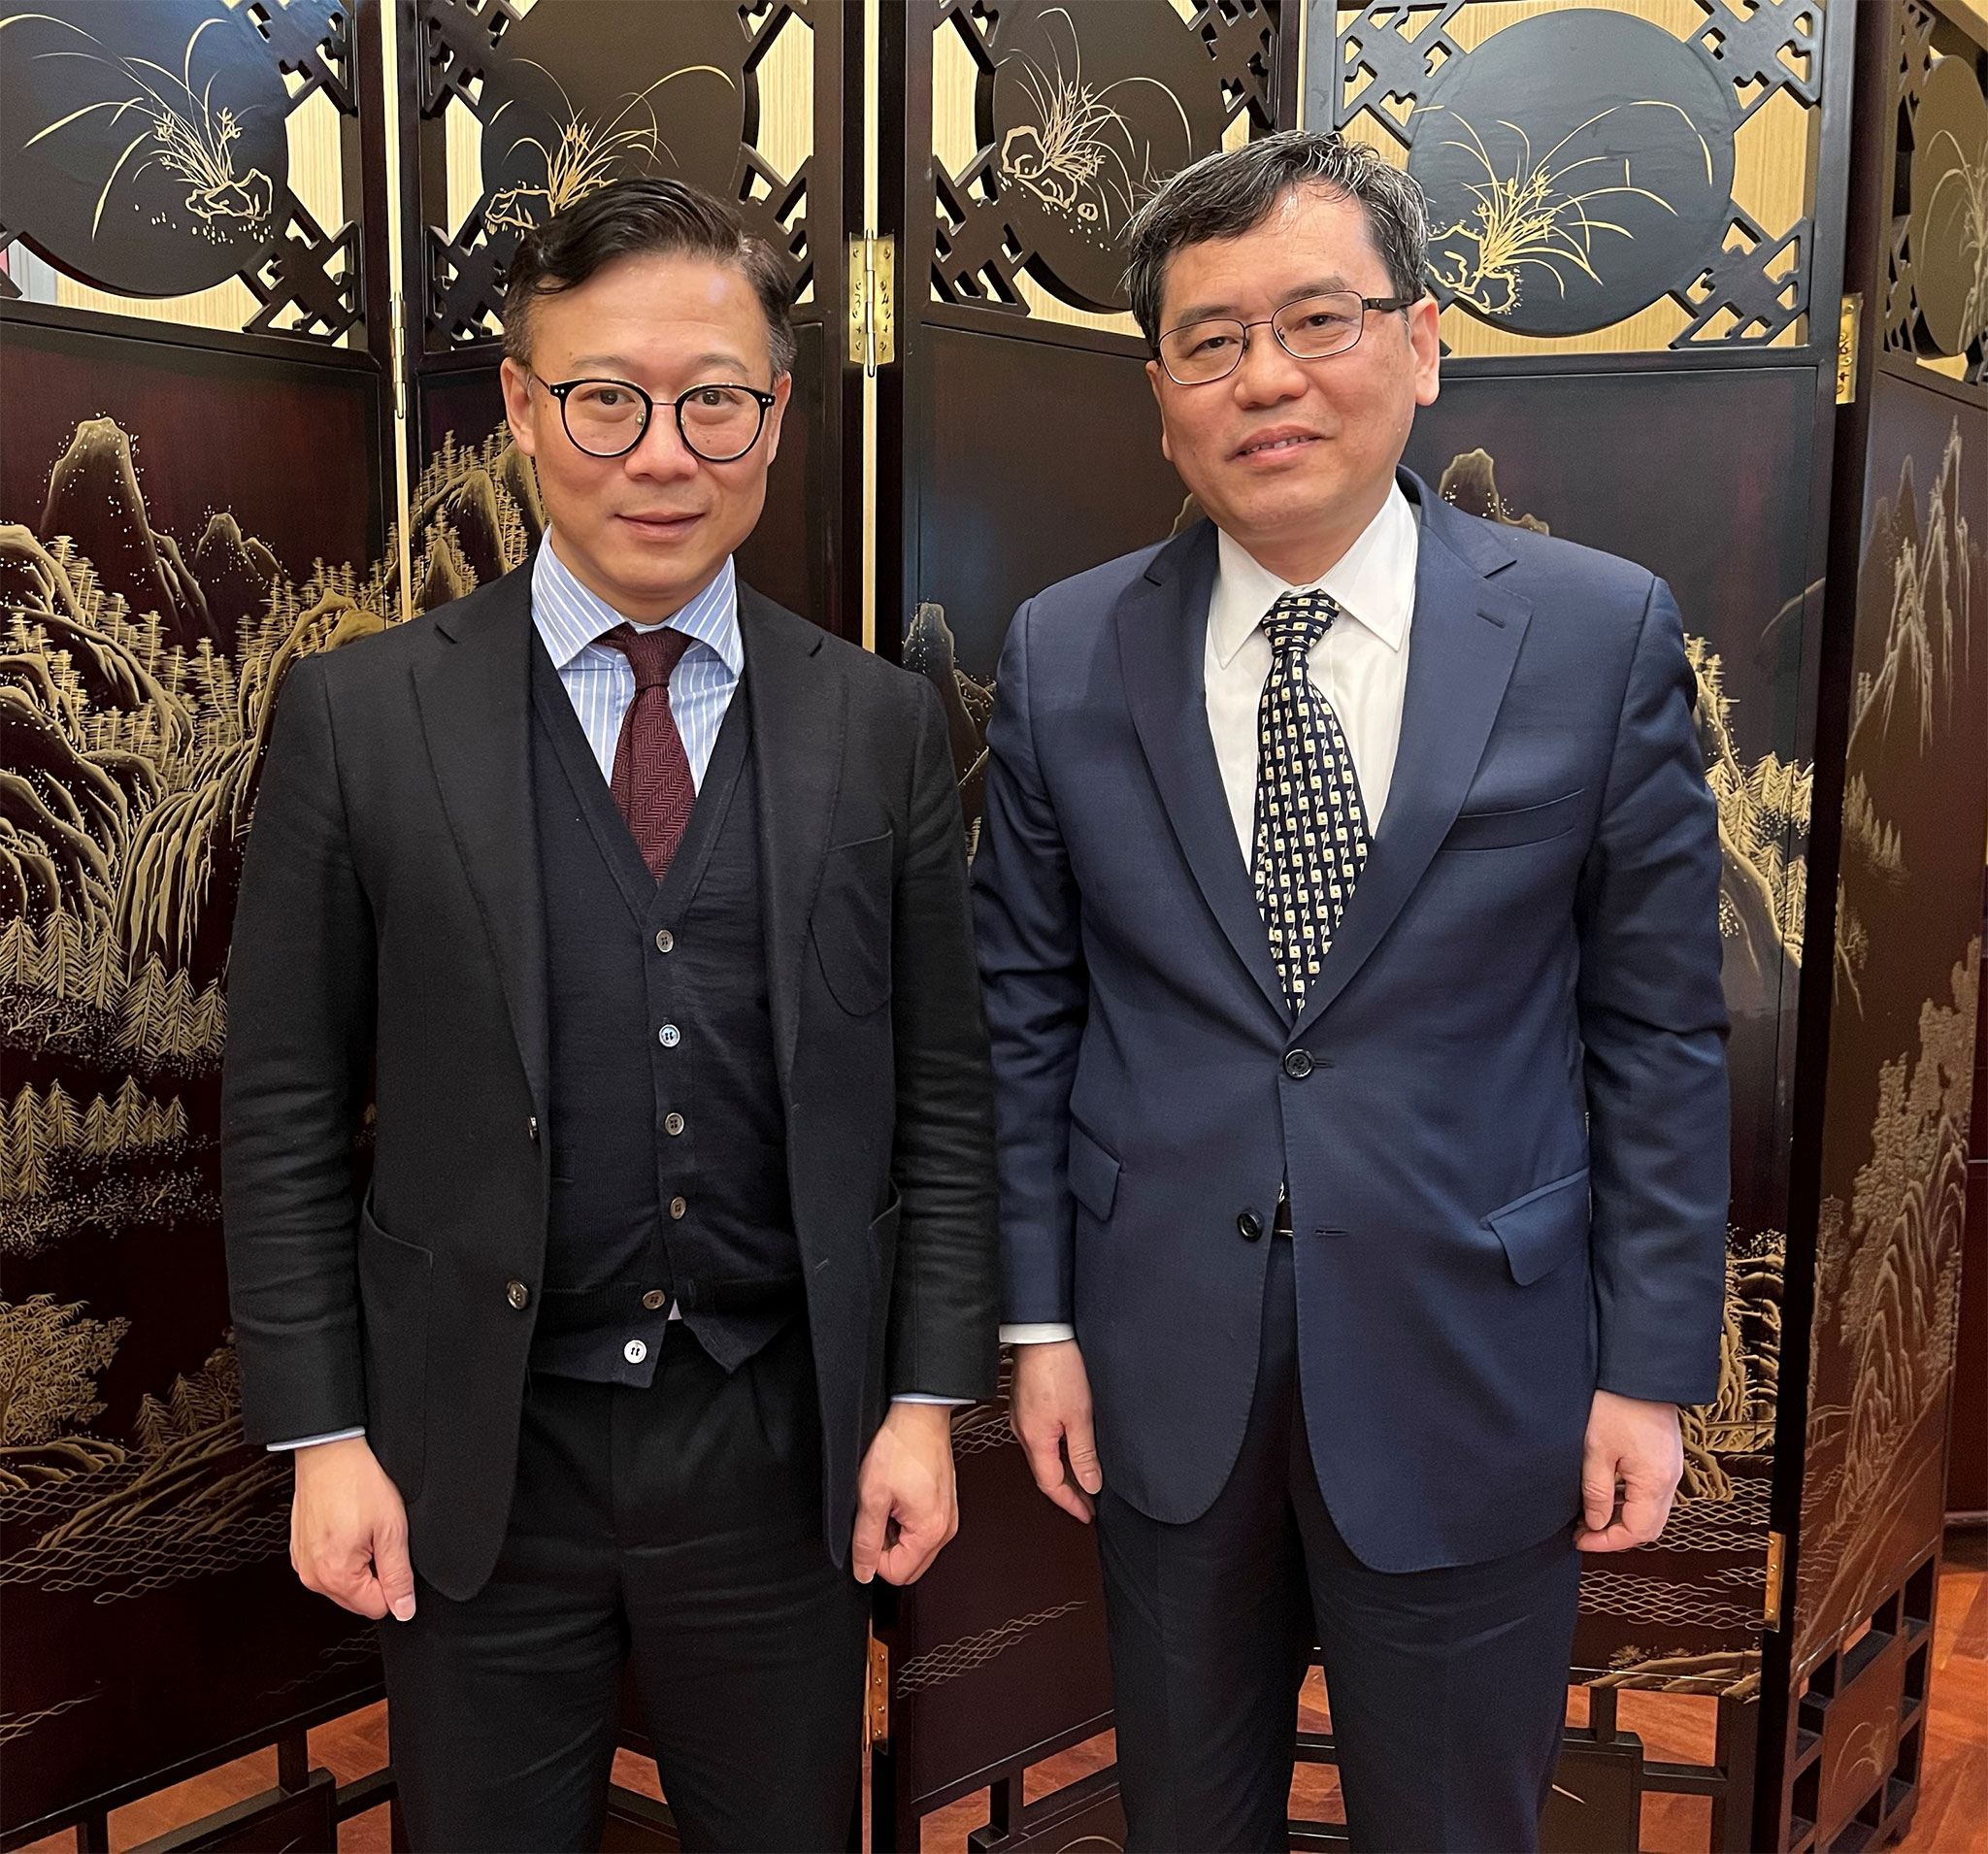 The Deputy Secretary for Justice, Mr Cheung Kwok-kwan (left), called on the Ambassador Extraordinary and Plenipotentiary of the People's Republic of China to the Kingdom of the Netherlands, Mr Tan Jian (right), in The Hague, the Netherlands, on March 10 (The Hague time).